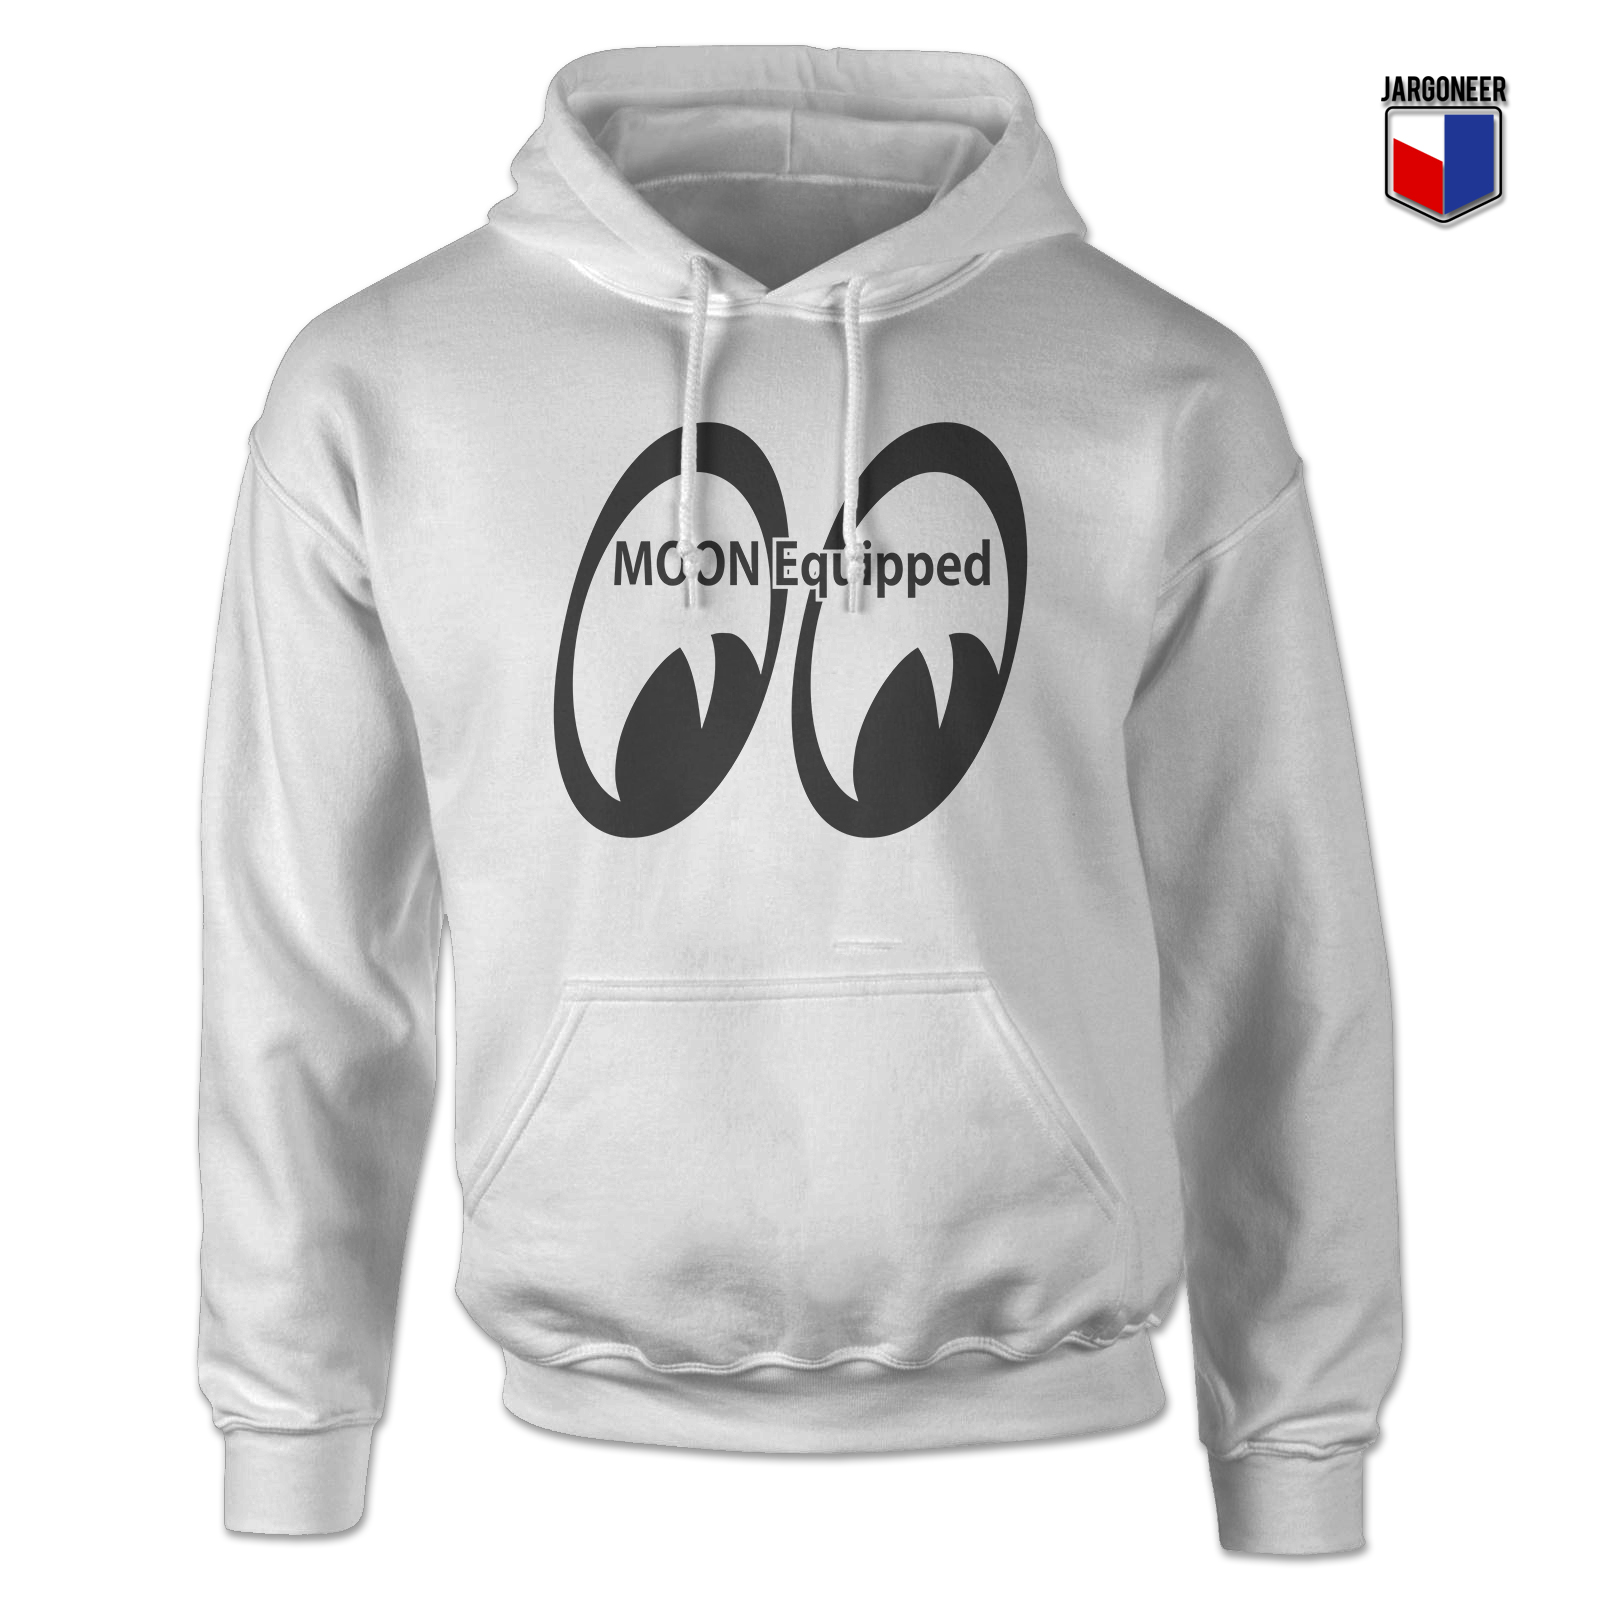 Moon Equipped White Hoody - Shop Unique Graphic Cool Shirt Designs